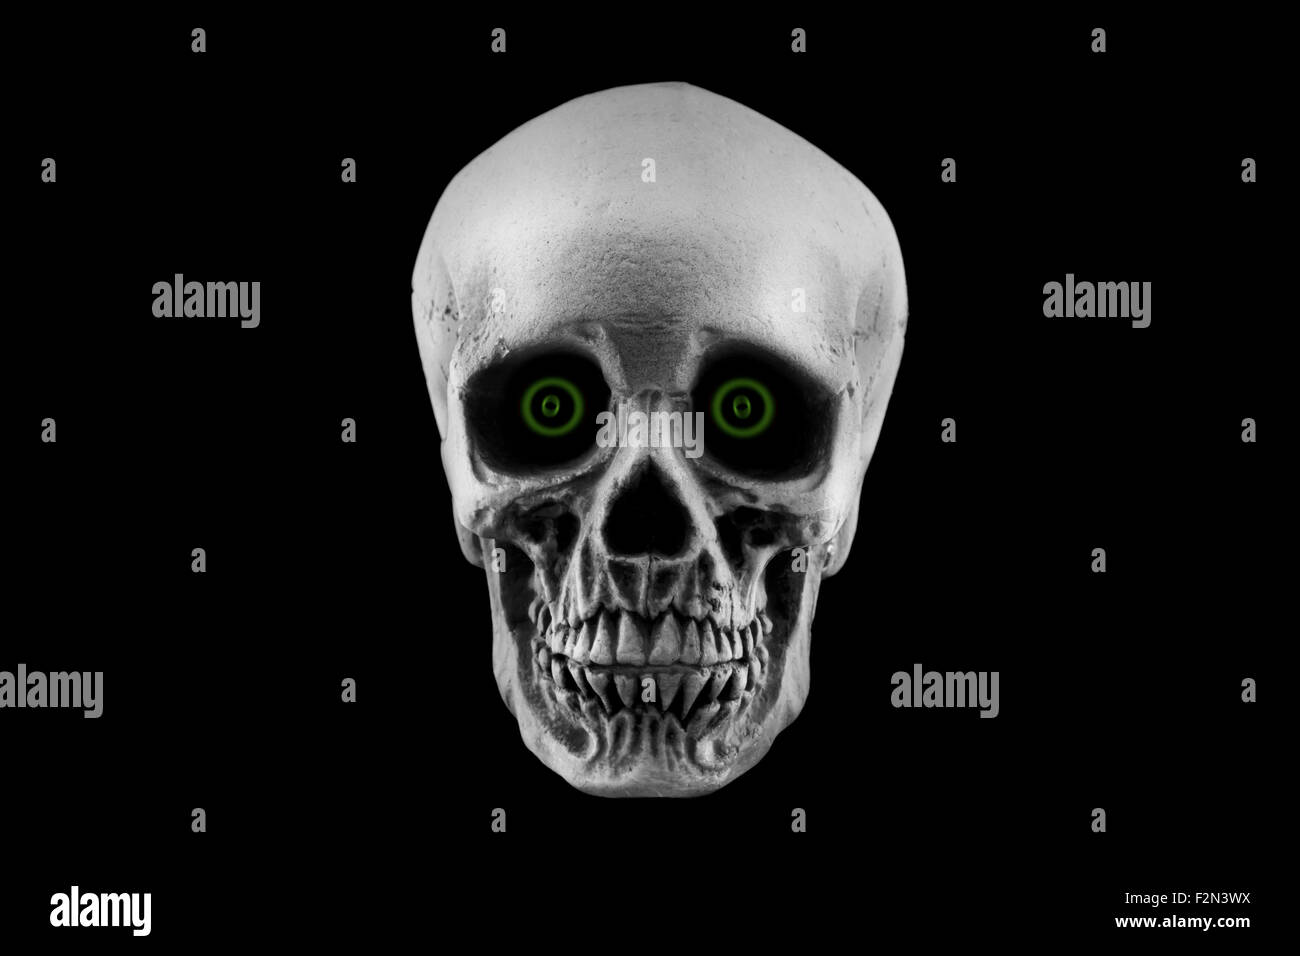 A Halloween skull decoration with green eyes isolated on a black background Stock Photo